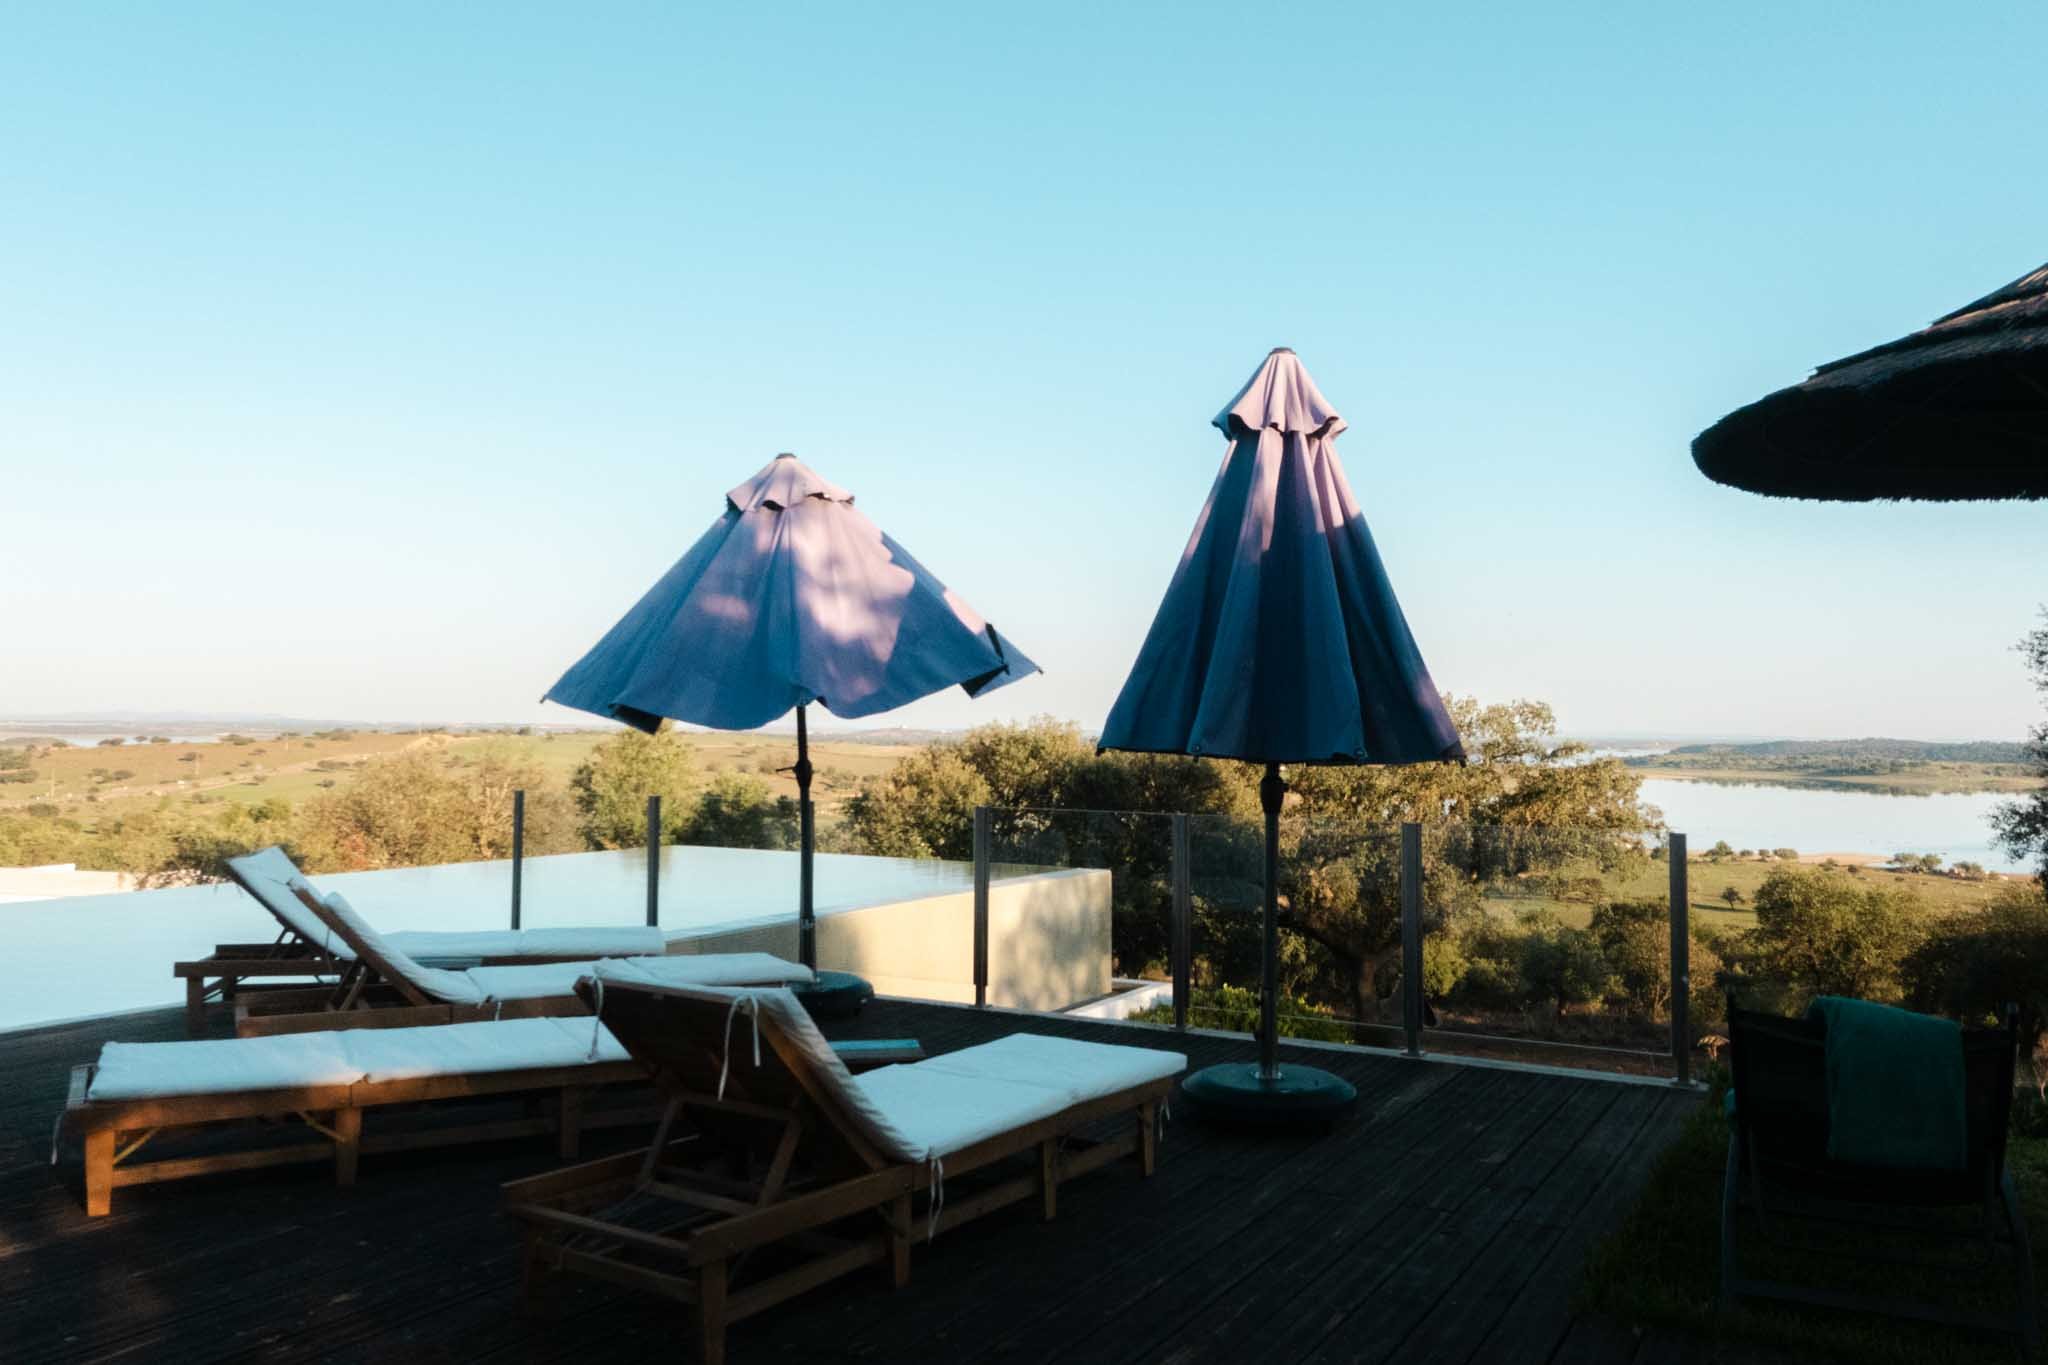 Montimerso Infinity Pool Alentejo - Montimerso SkyScape Country House - Eco Friendly Hotel in Alentejo Portugal - The Wildest Road Blog.jpg